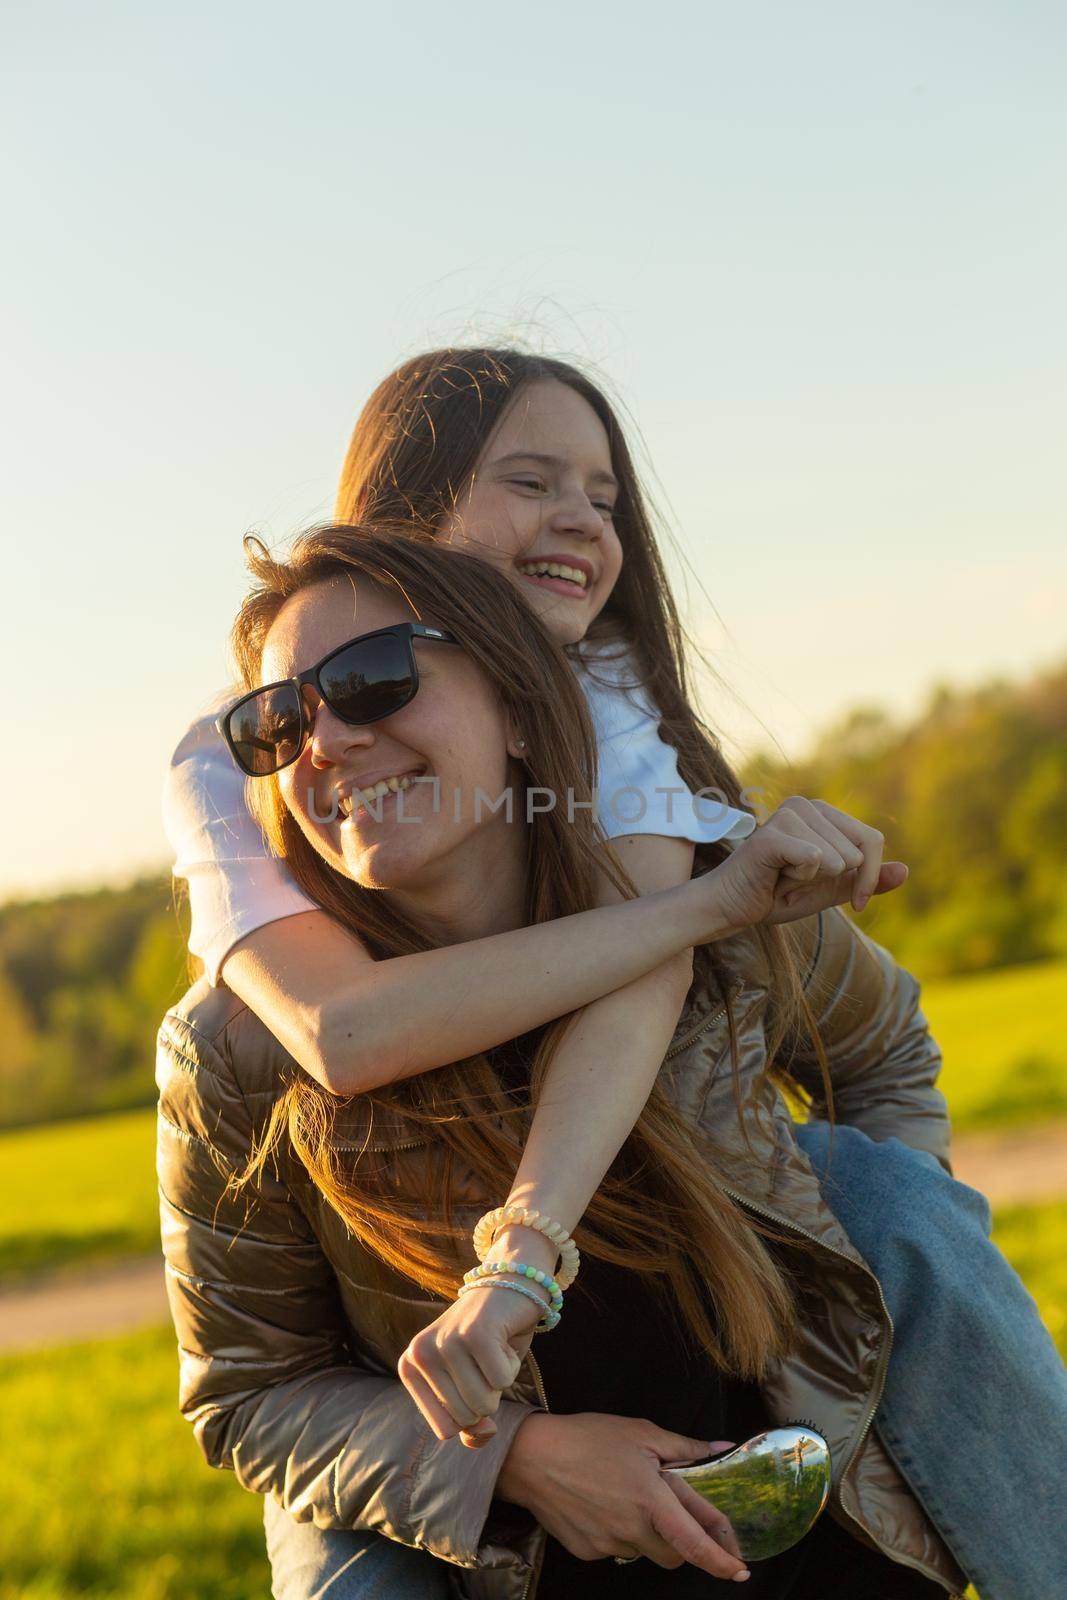 Playful mother giving daughter piggy back ride at green field. by BY-_-BY